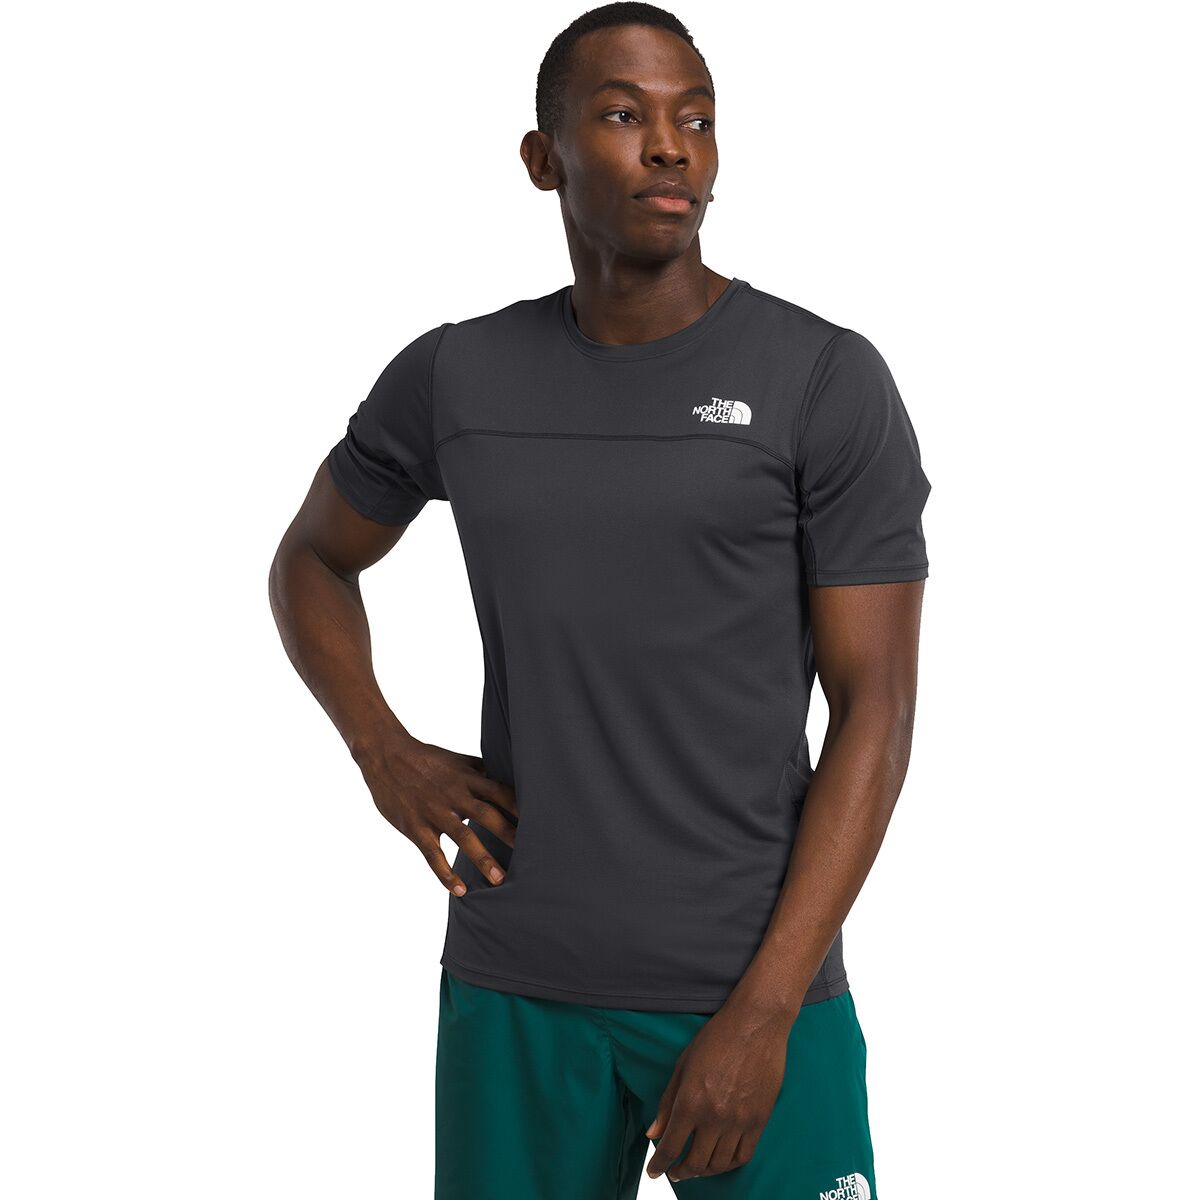 The North Face TNF Terry Crew - Men's Meld Grey, M